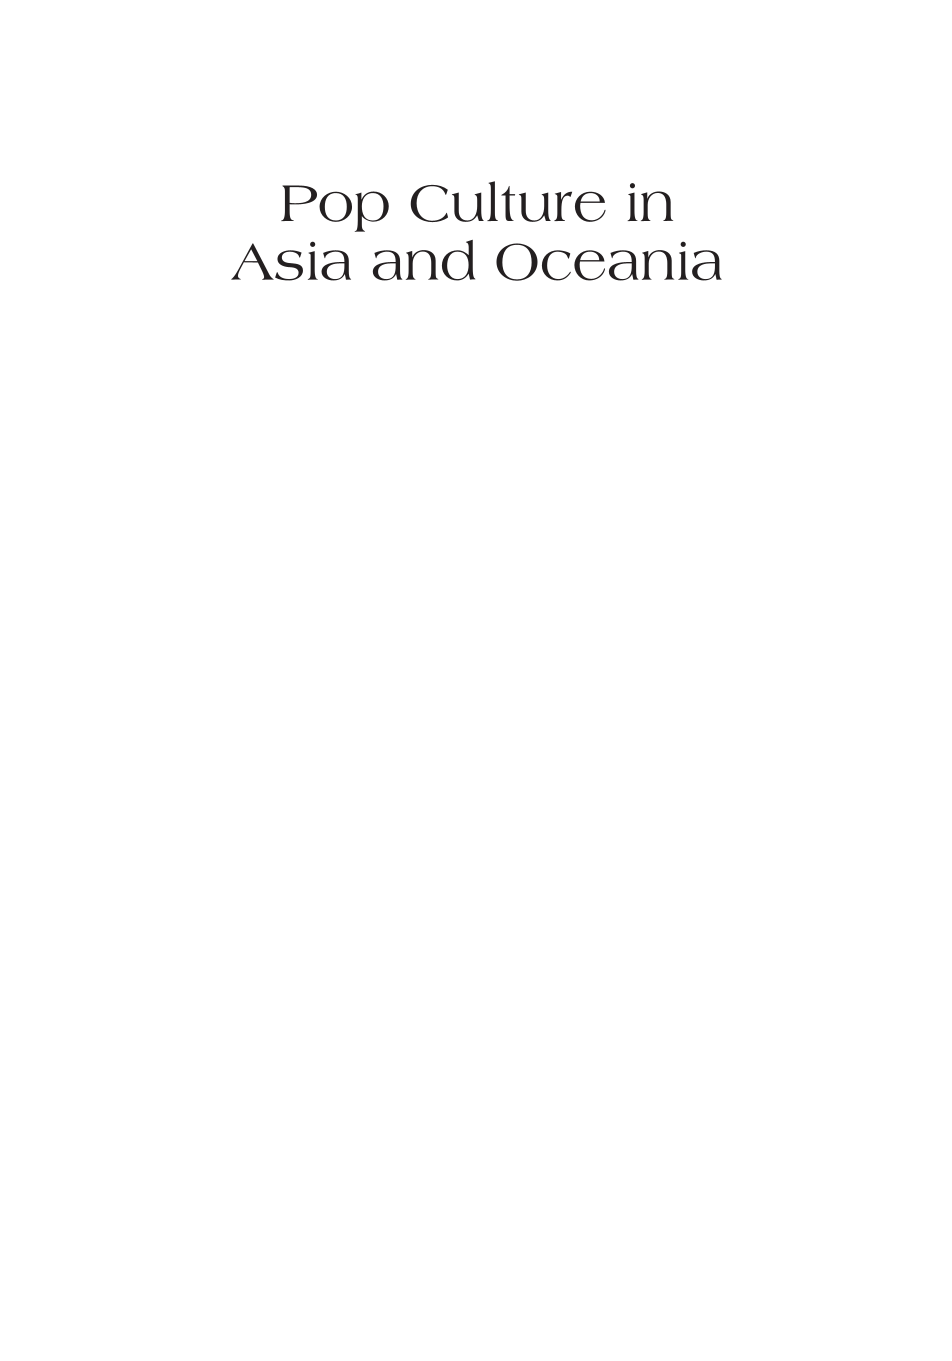 Pop Culture in Asia and Oceania page i